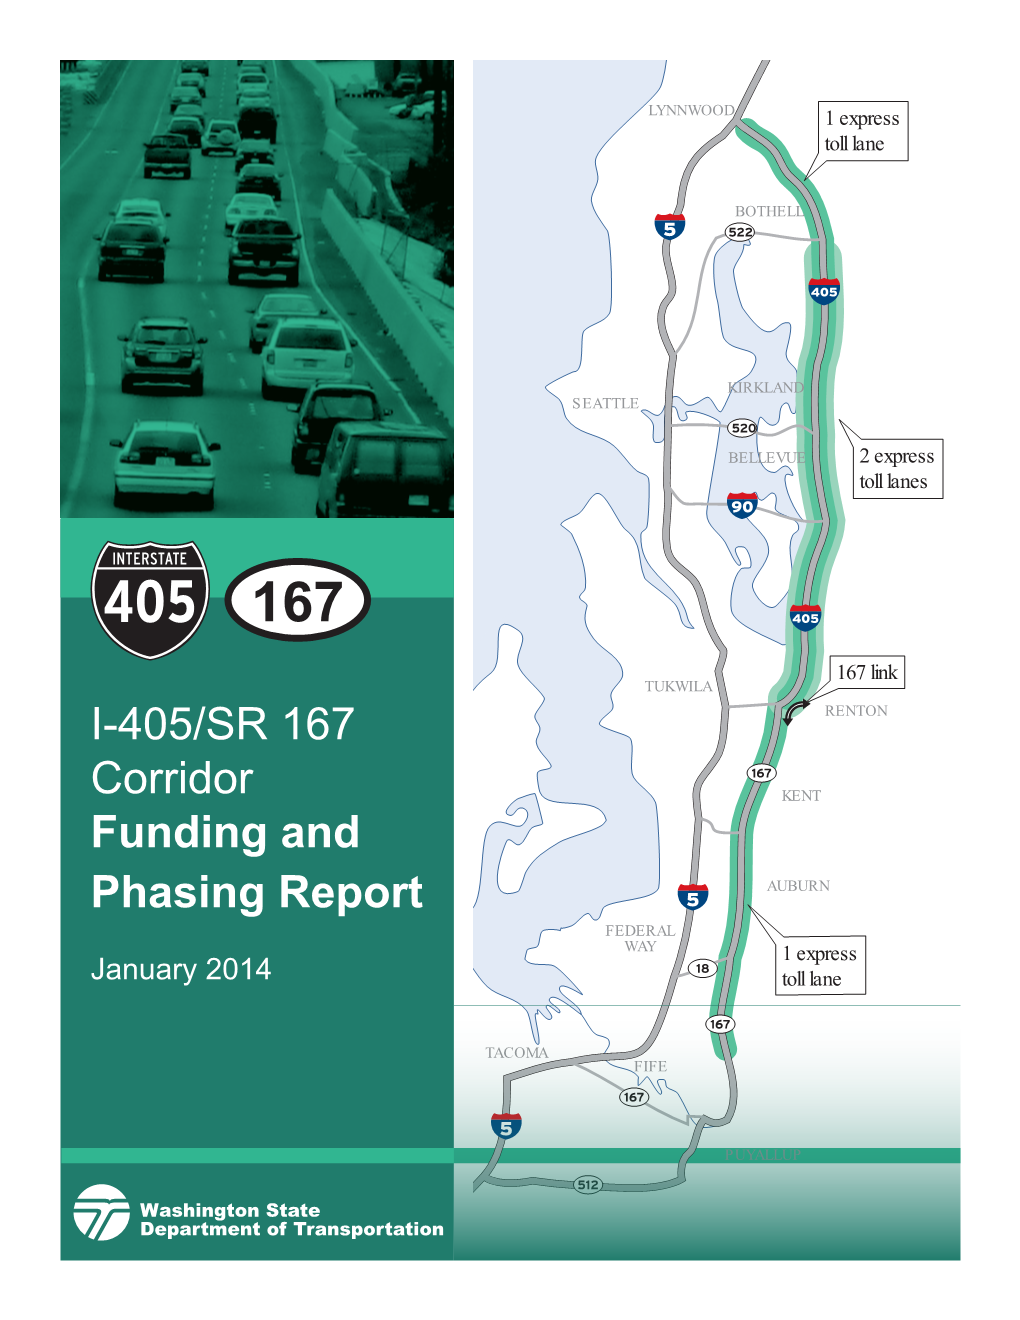 I-405/SR 167 Funding and Phasing Report